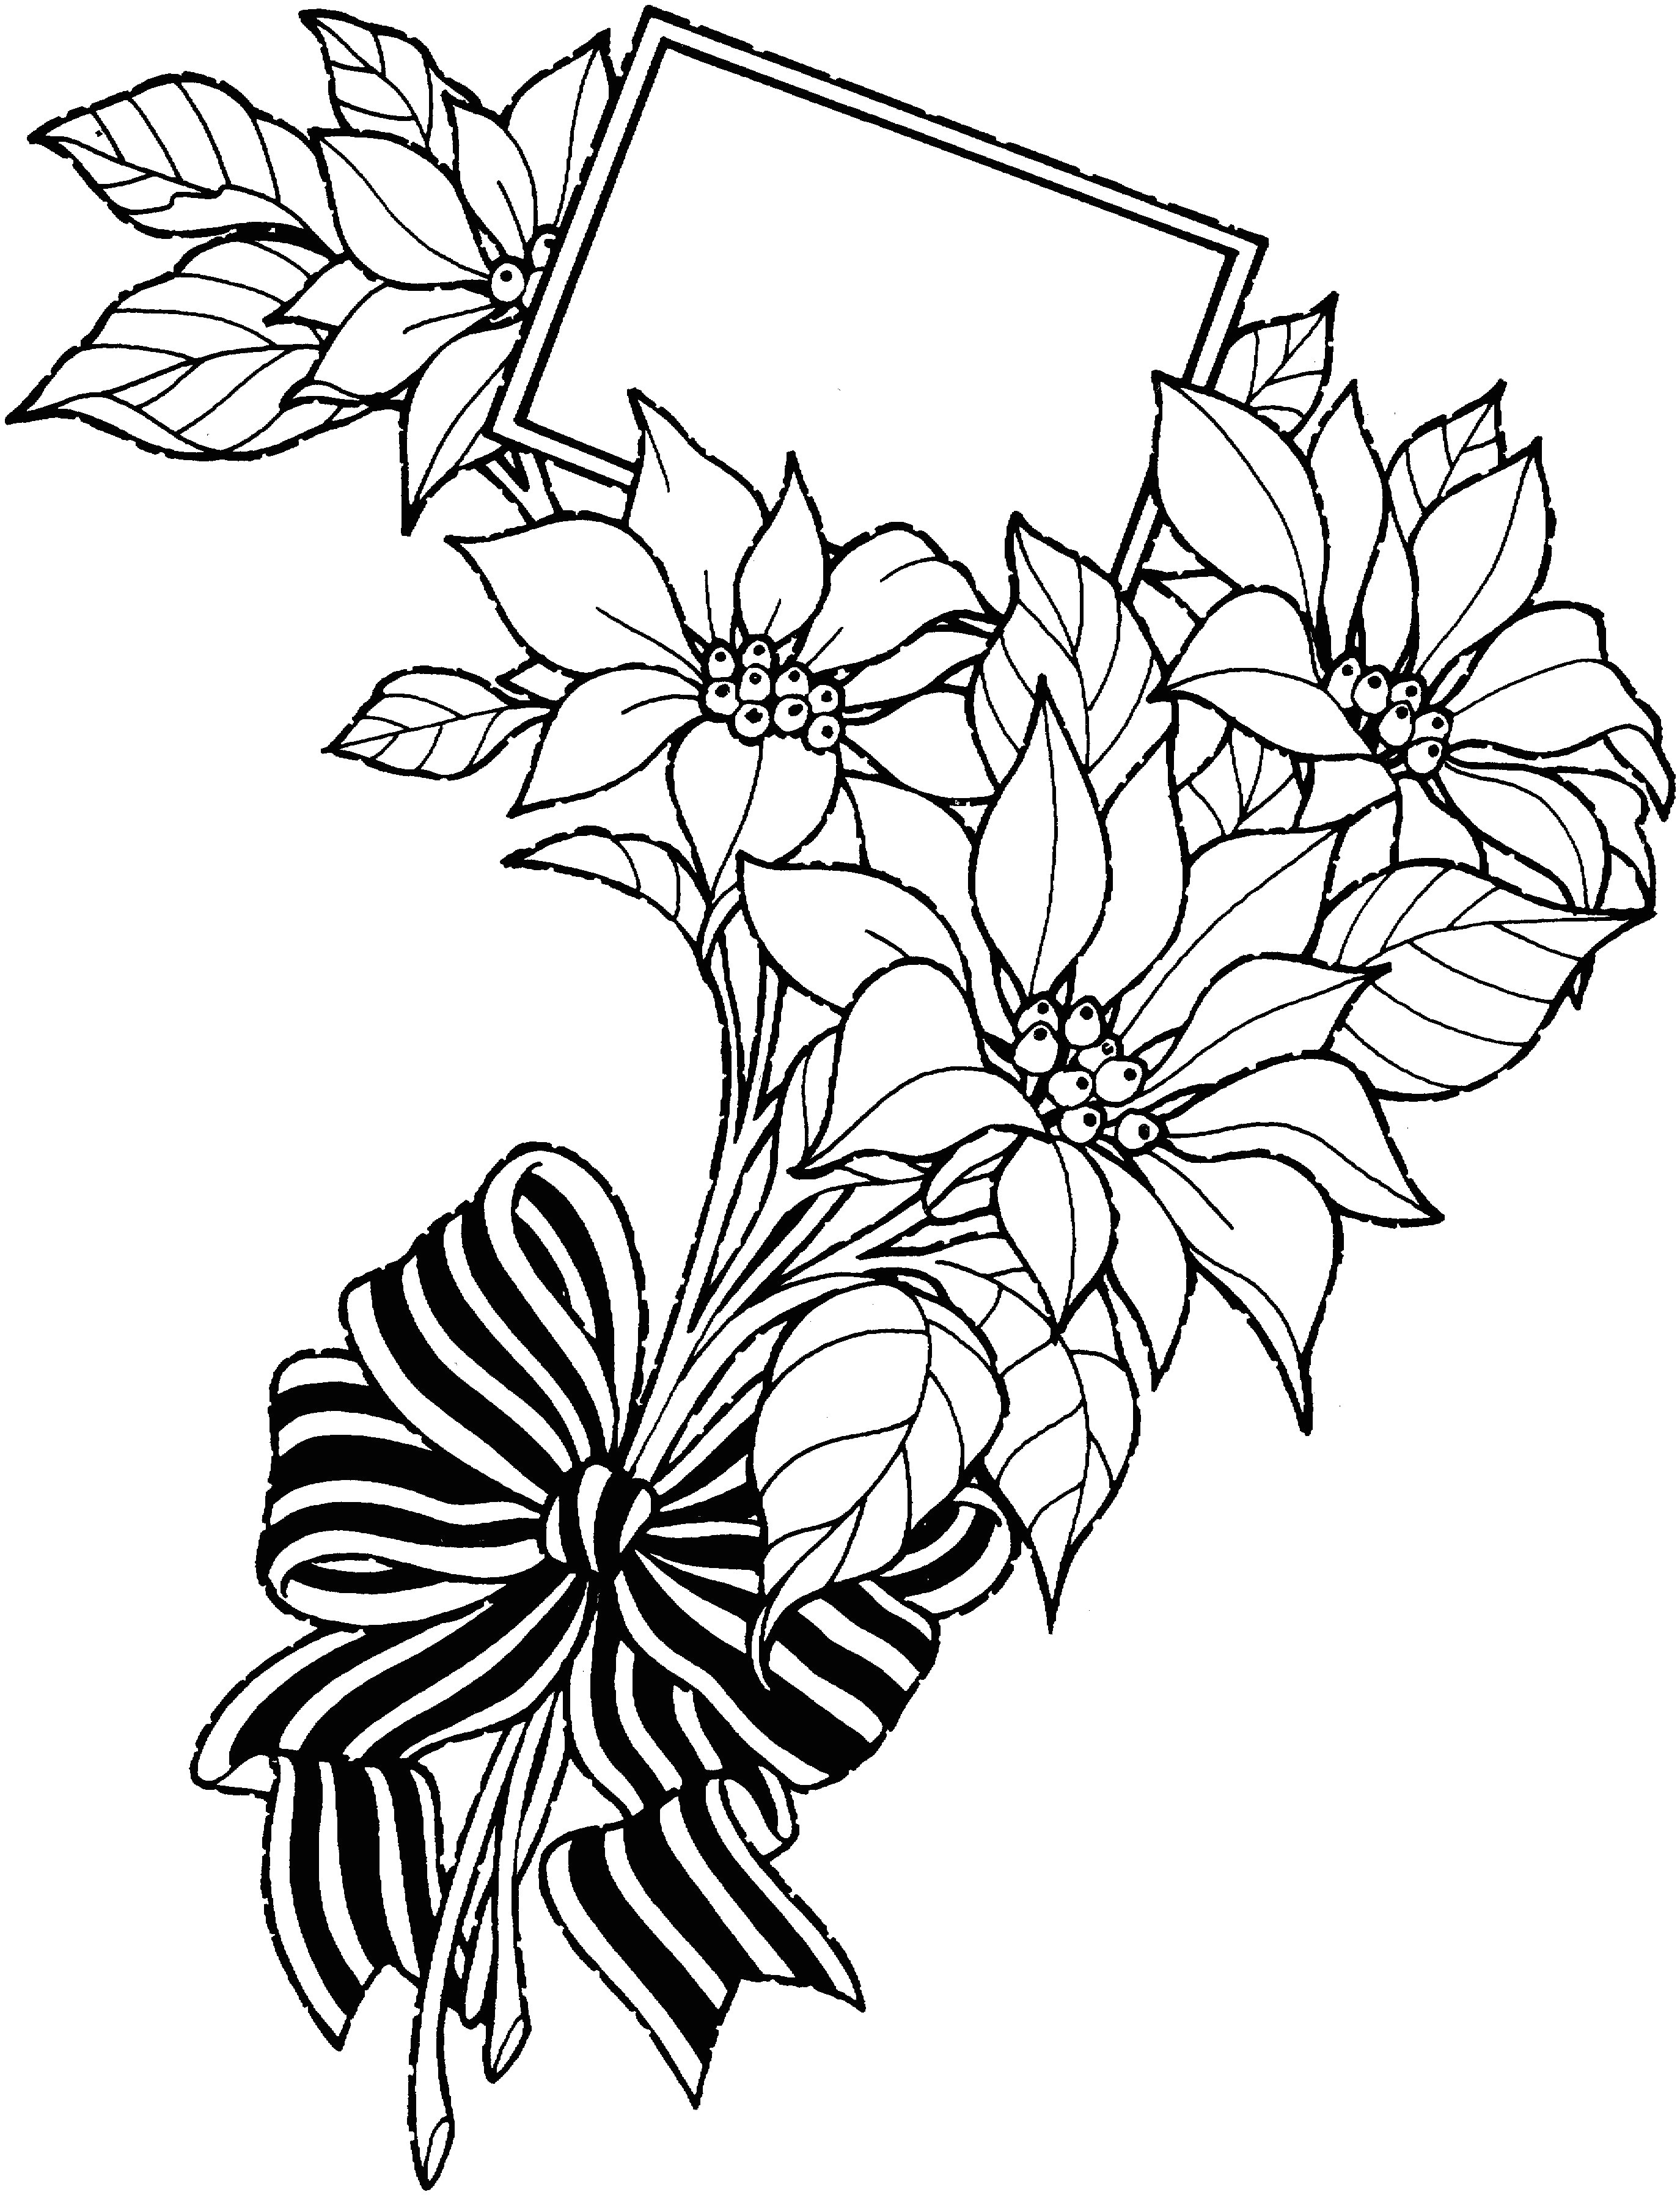 Drawings Of Roses Clipart Roses Clipart Black and White Charte Graphique org